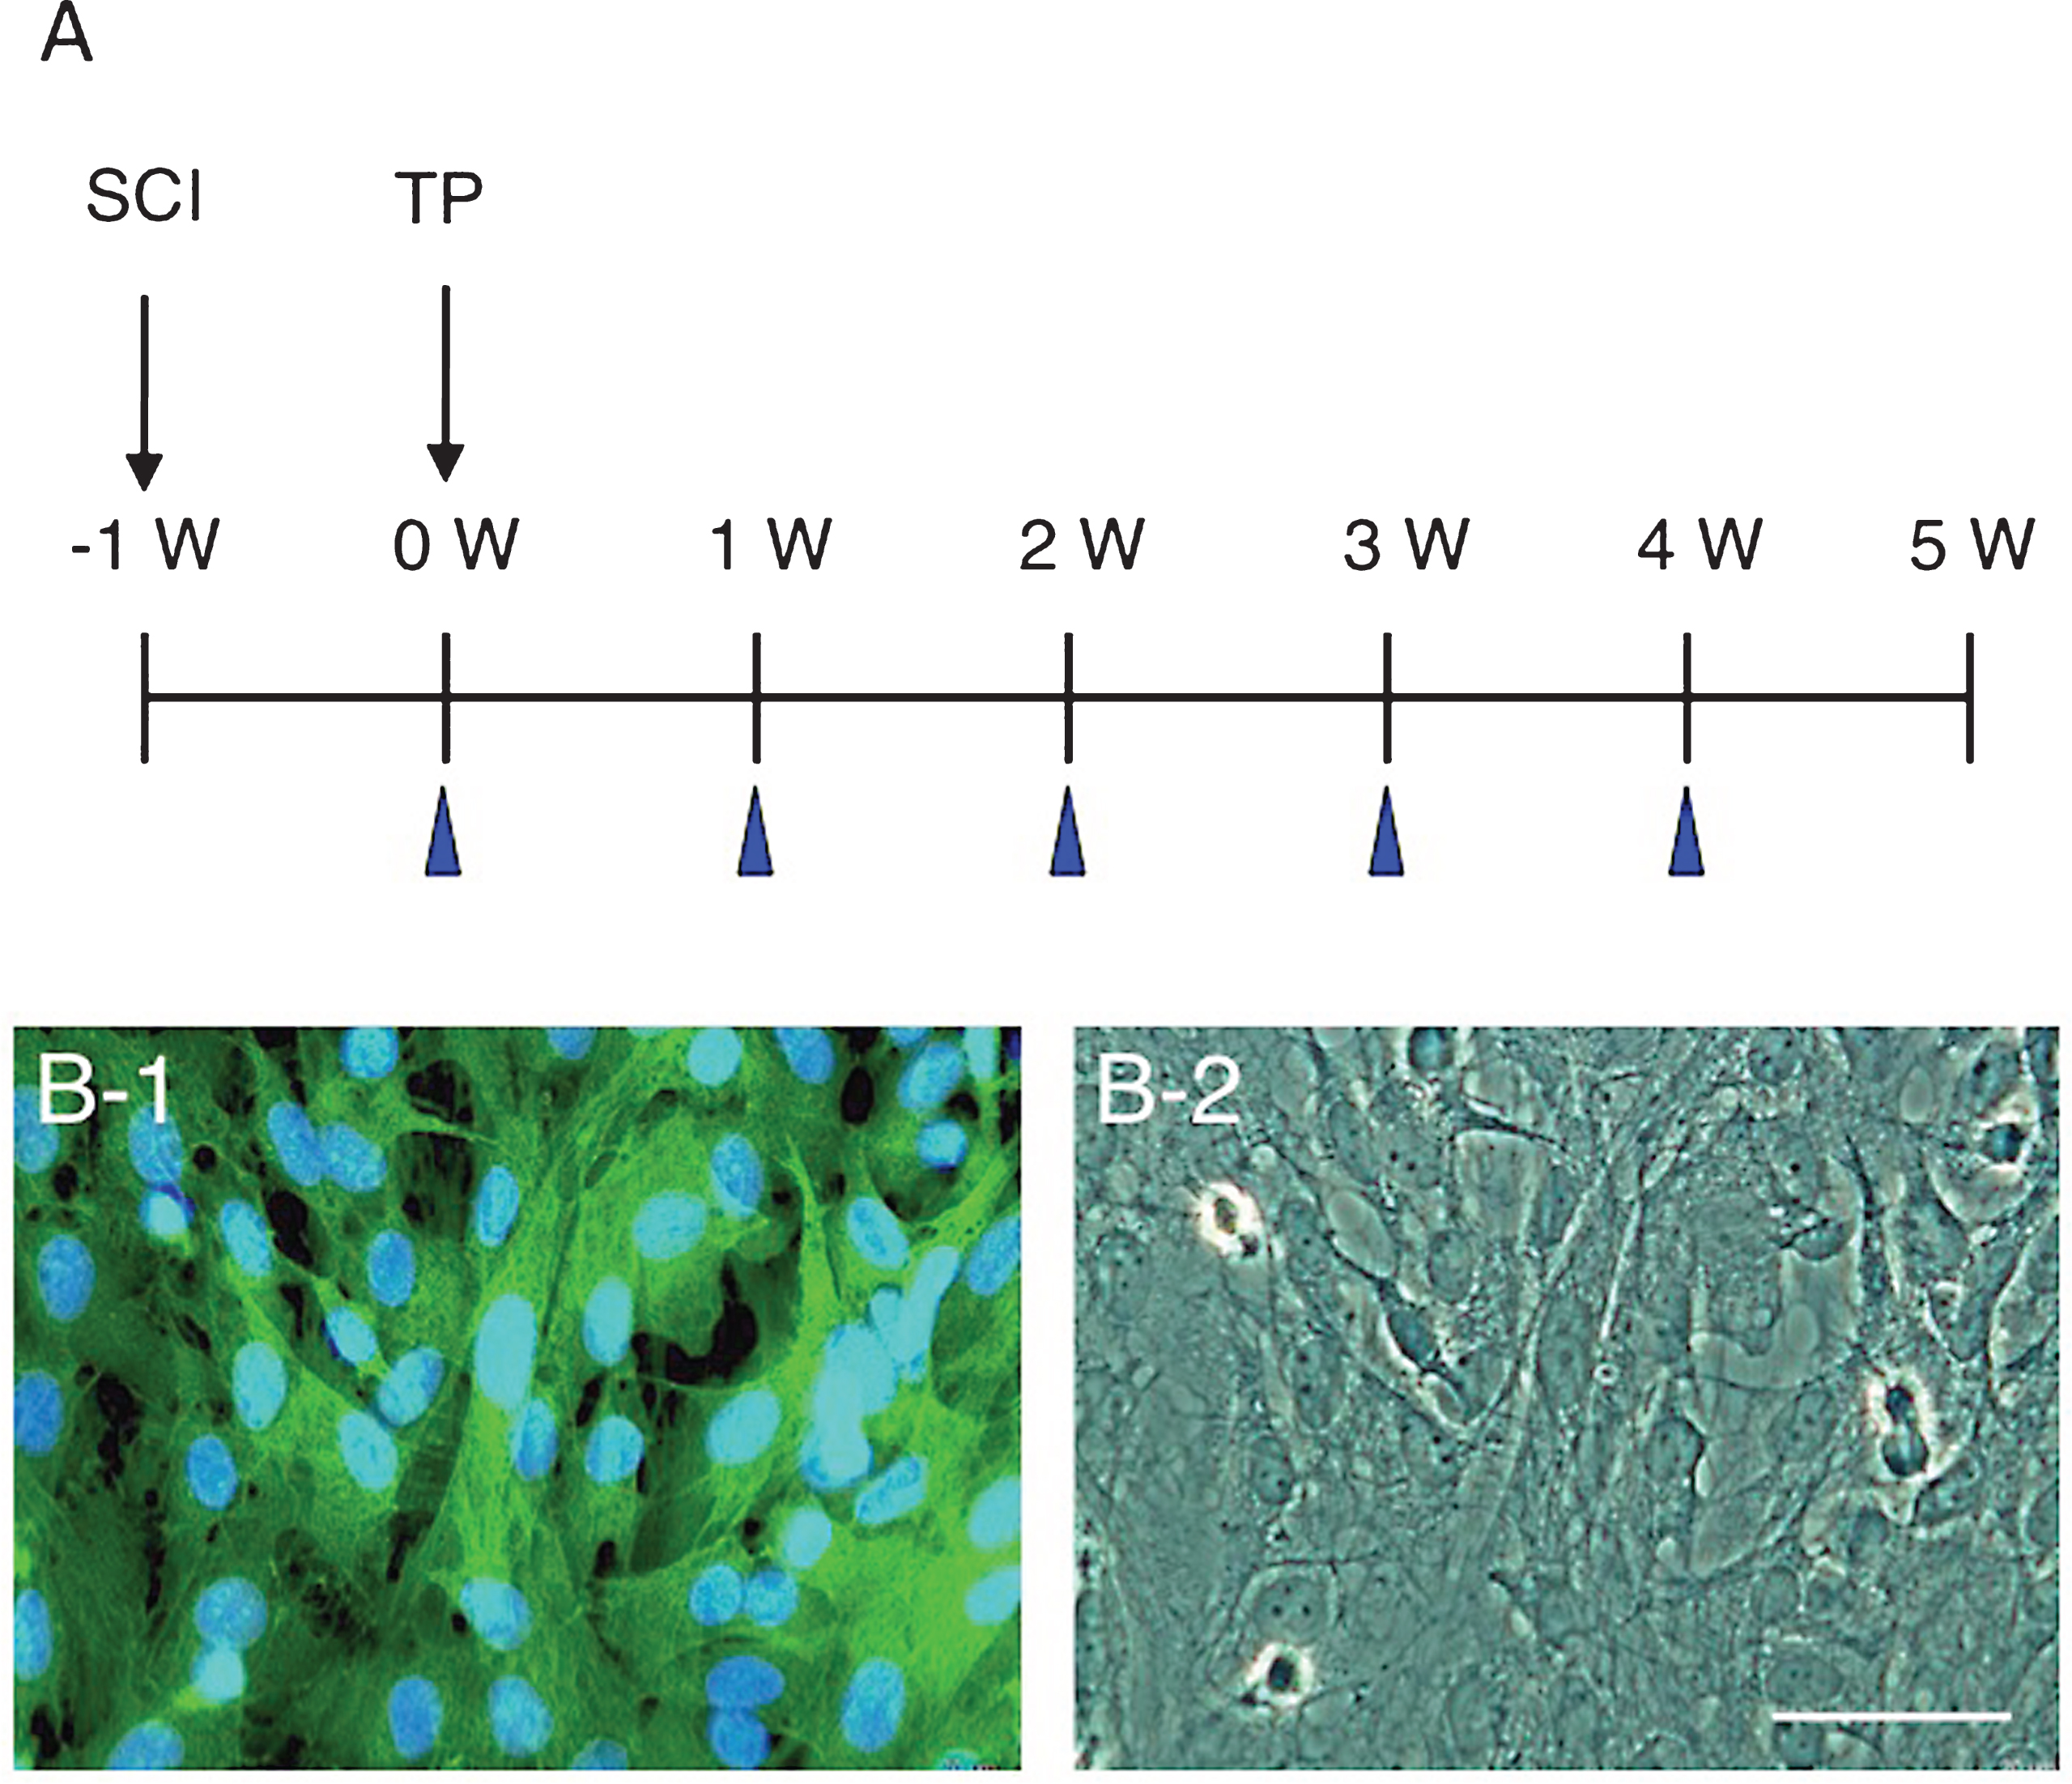 A: The time course of surgery and cell transplantation. Cell transplantation (TP) was performed 1 week after spinal cord injury (SCI). BBB scores were evaluated at the time points indicated with arrowheads. B: All CPECs cultured from GFP-transgenic rats are green-fluorescent (B-1). The same region is shown by phase-contrast microscopy (B-2). Scale: 50 μm for B-1 and B-2.